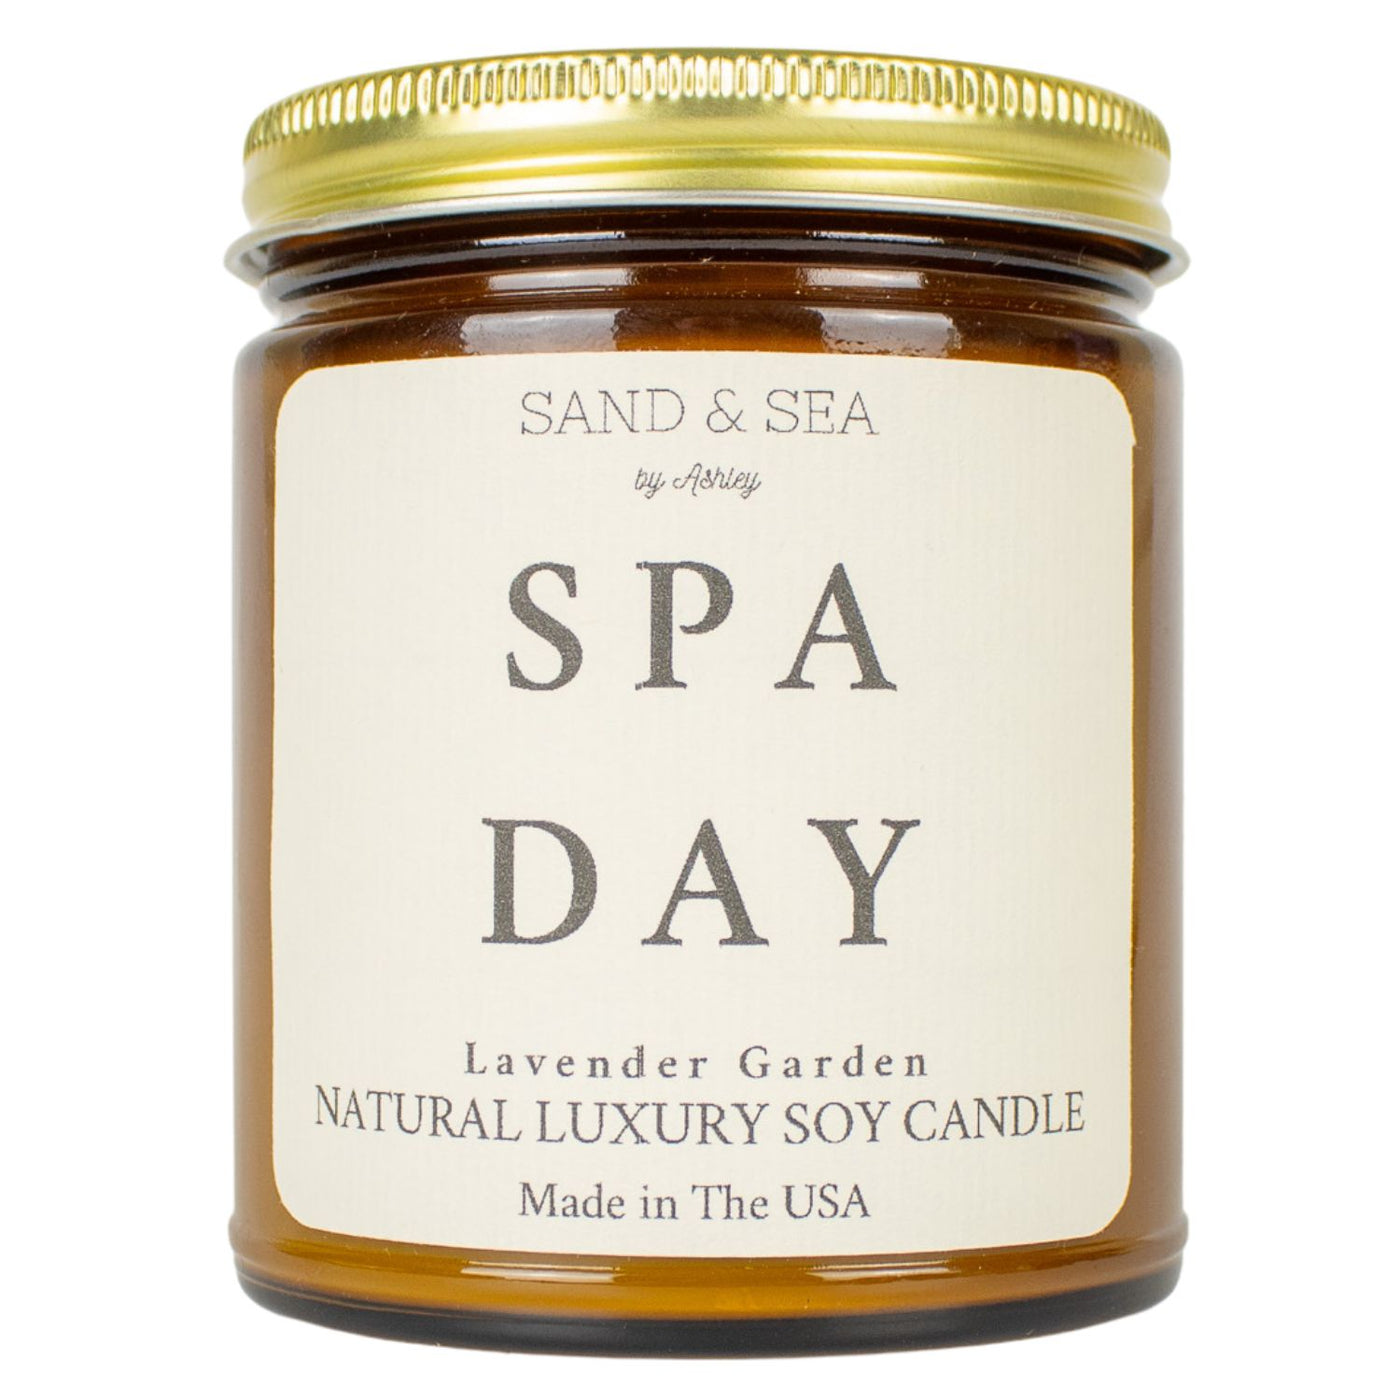 Spa Day Candle Gift Sets